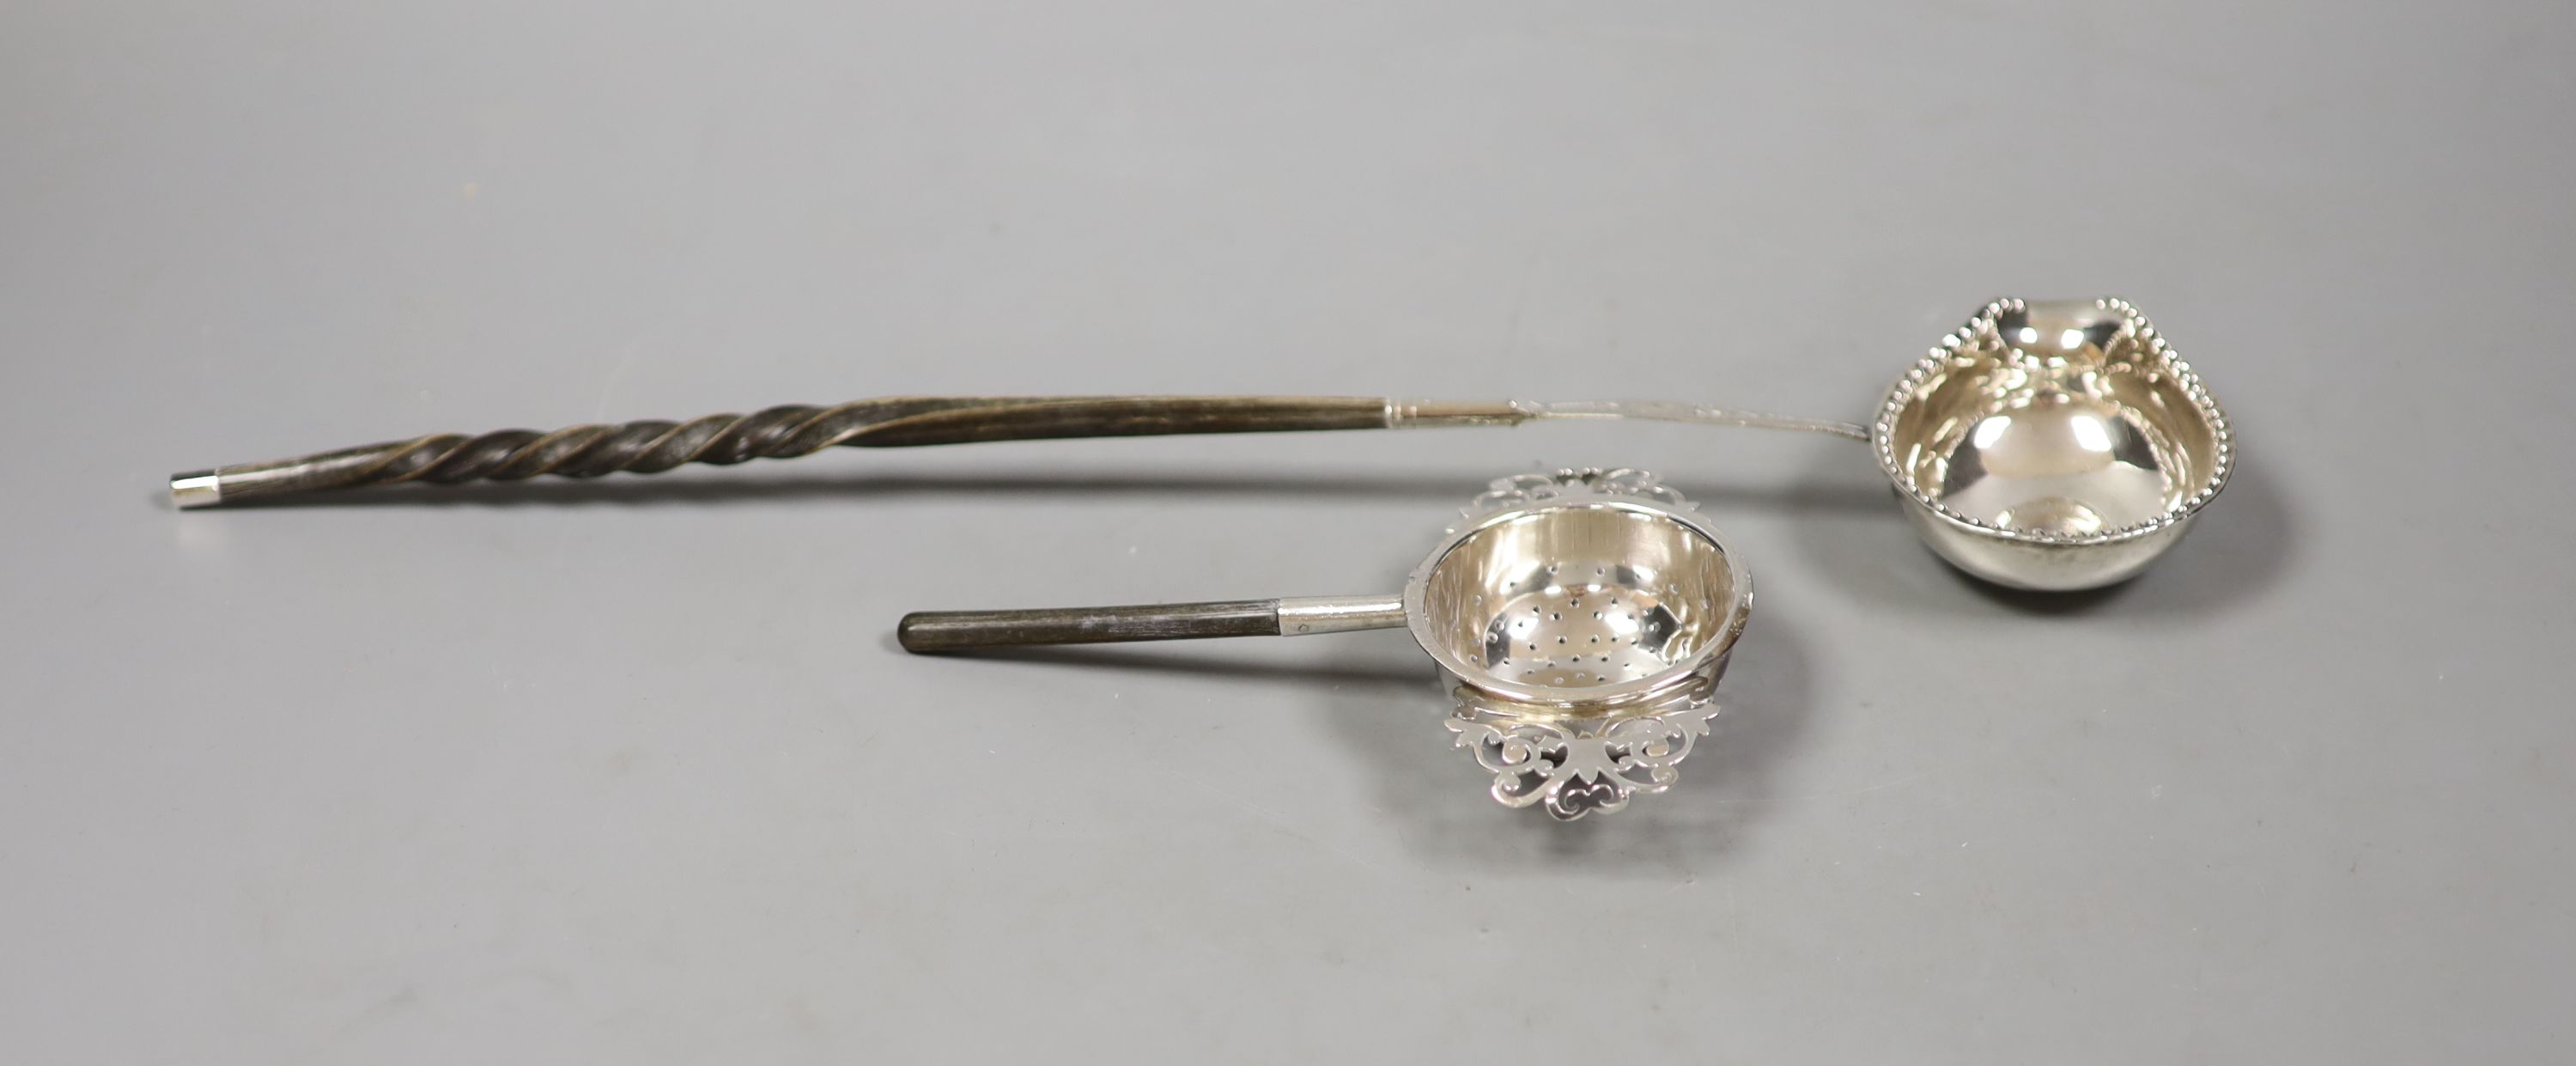 A straining ladle, Sheffield, 1909 by Harrison Brothers & George Howson, together with a coin set toddy ladle.